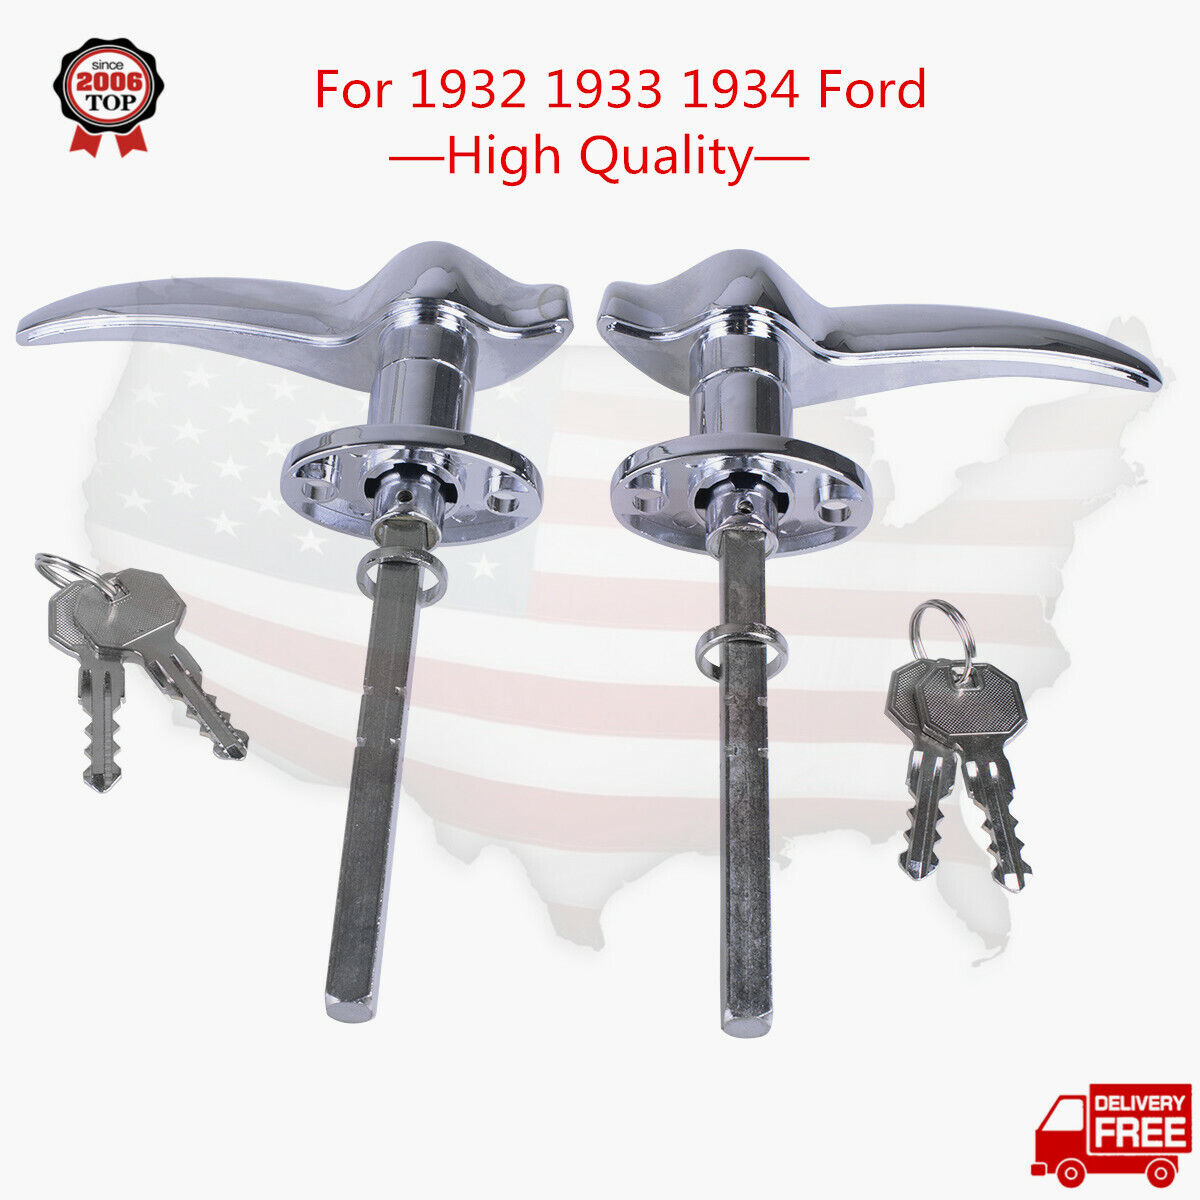 LOCKS Outside Locking Door Handles For 1932 Ford 3 Window 1933 1934 For MATCHING